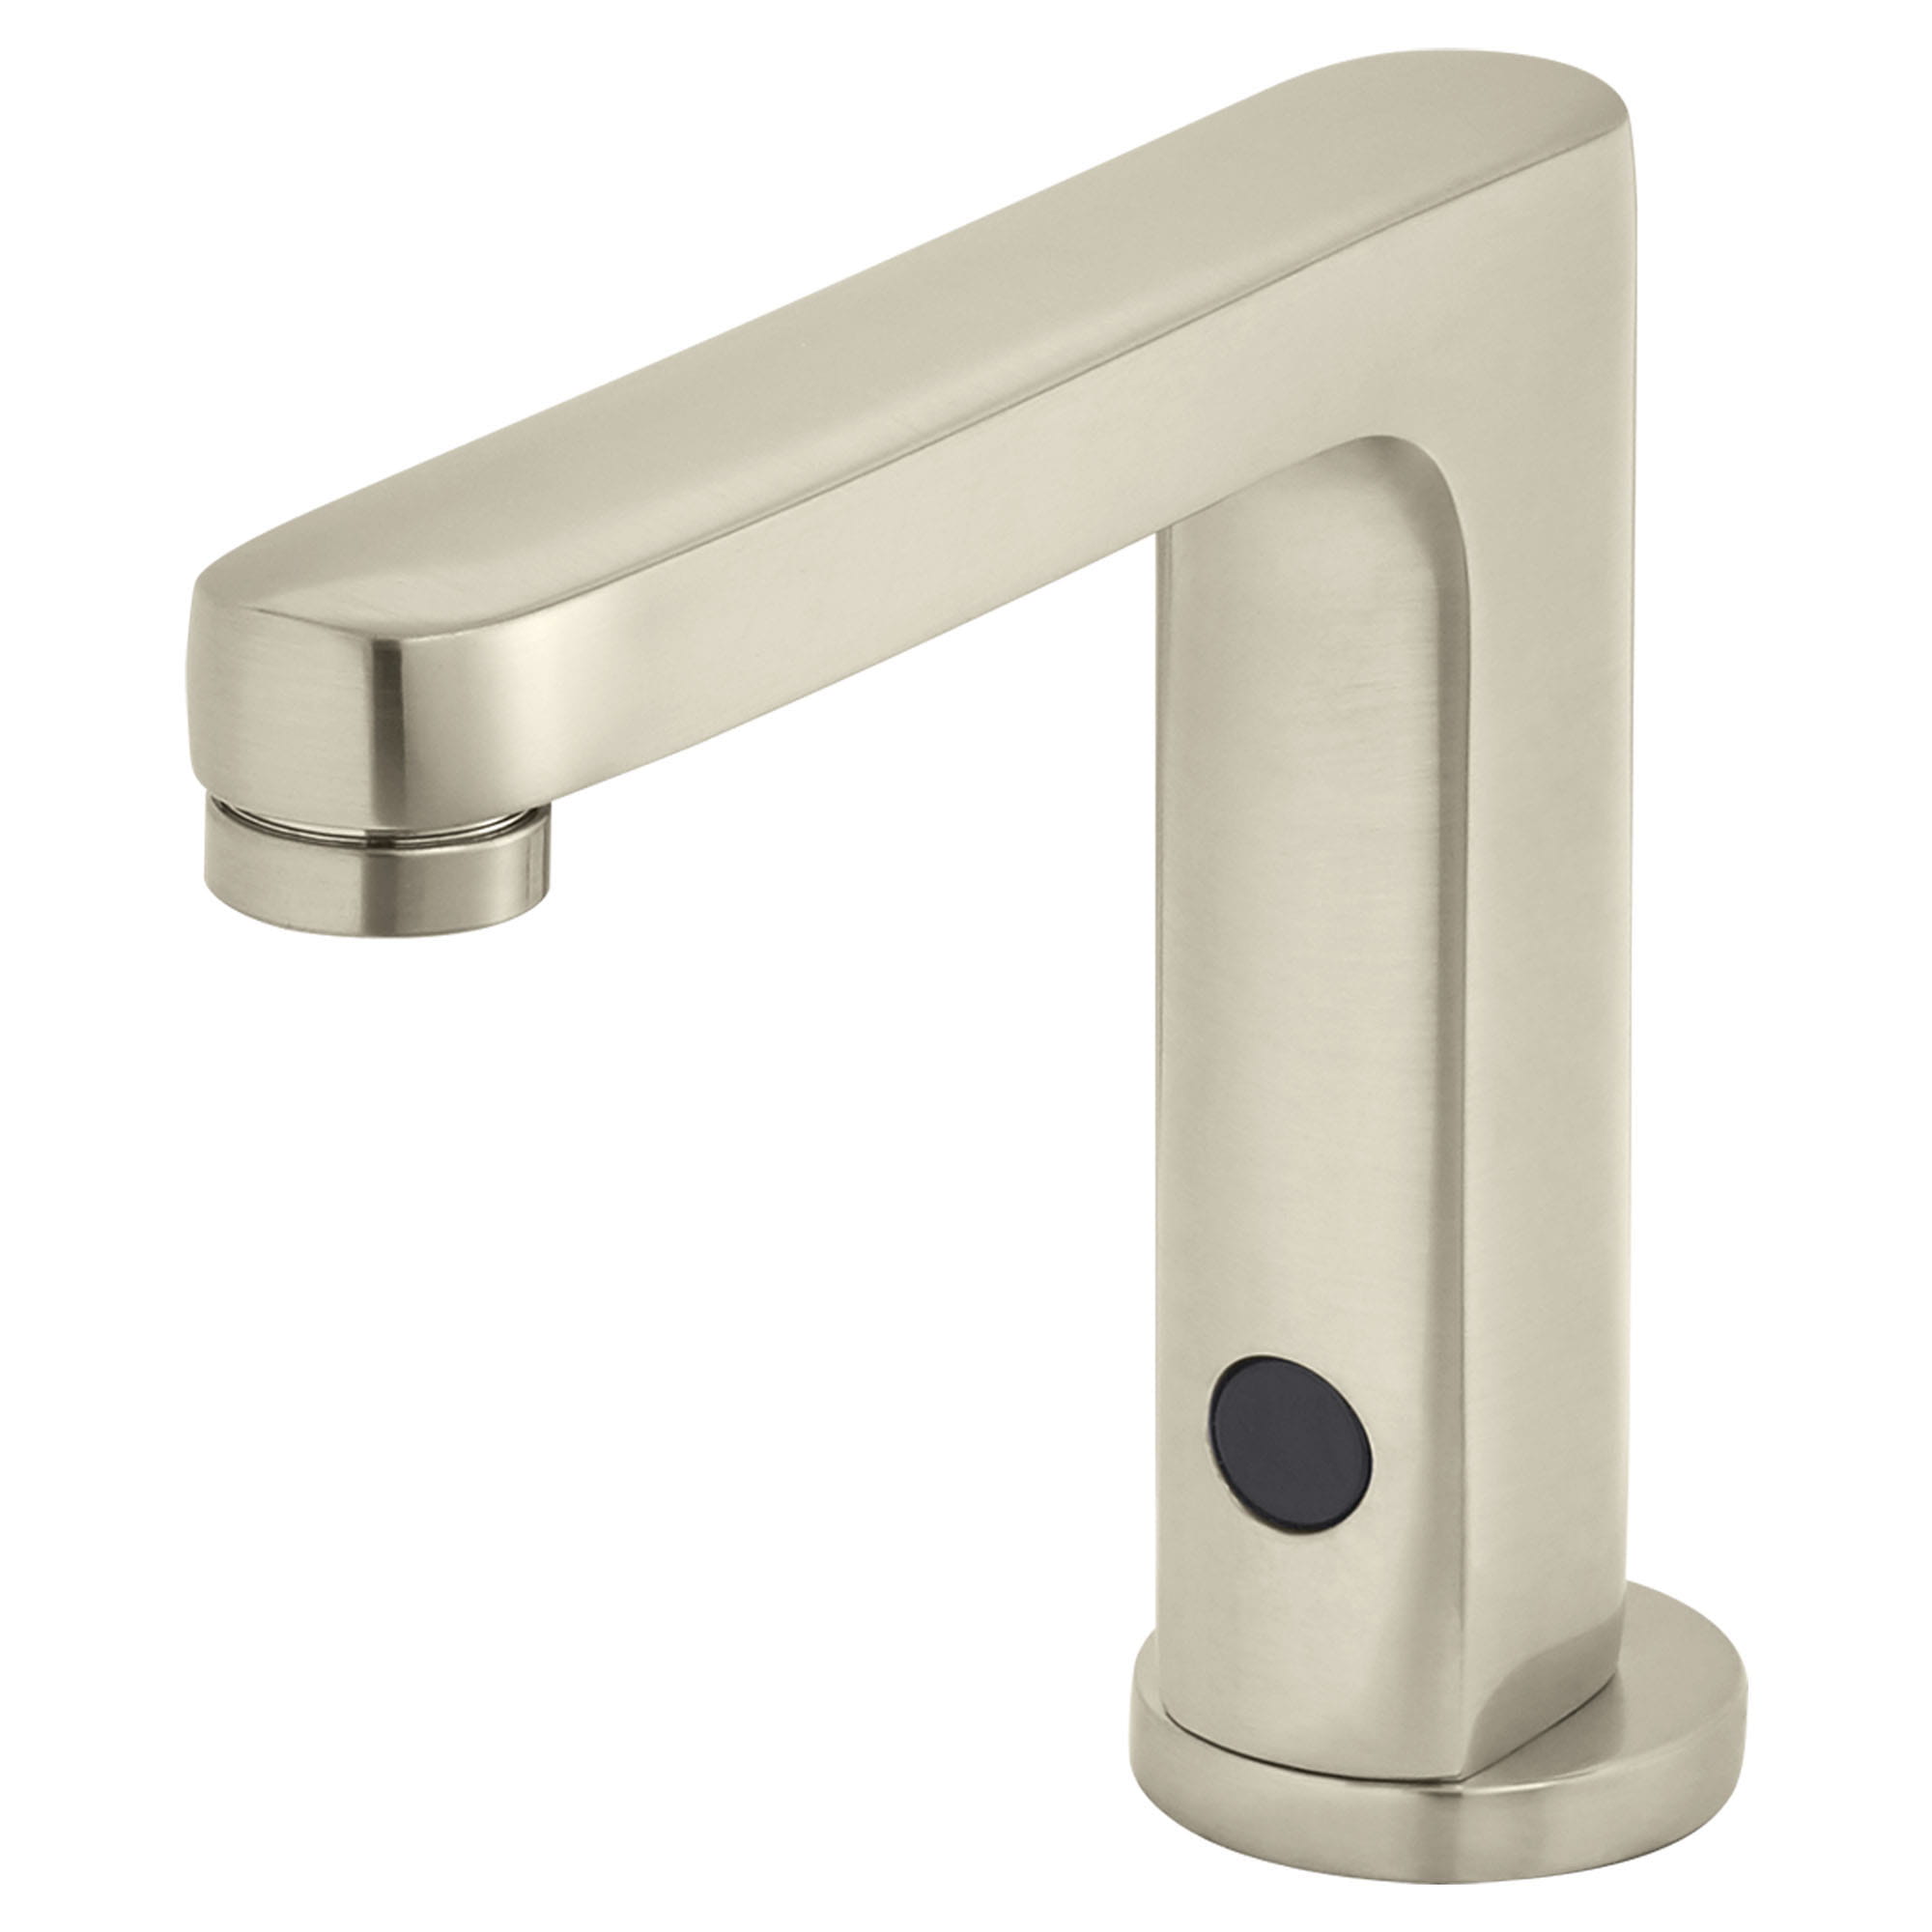 Moments Selectronic Touchless Faucet, PWRX 10 Year Battery, 1.5 gpm/5.7 Lpm